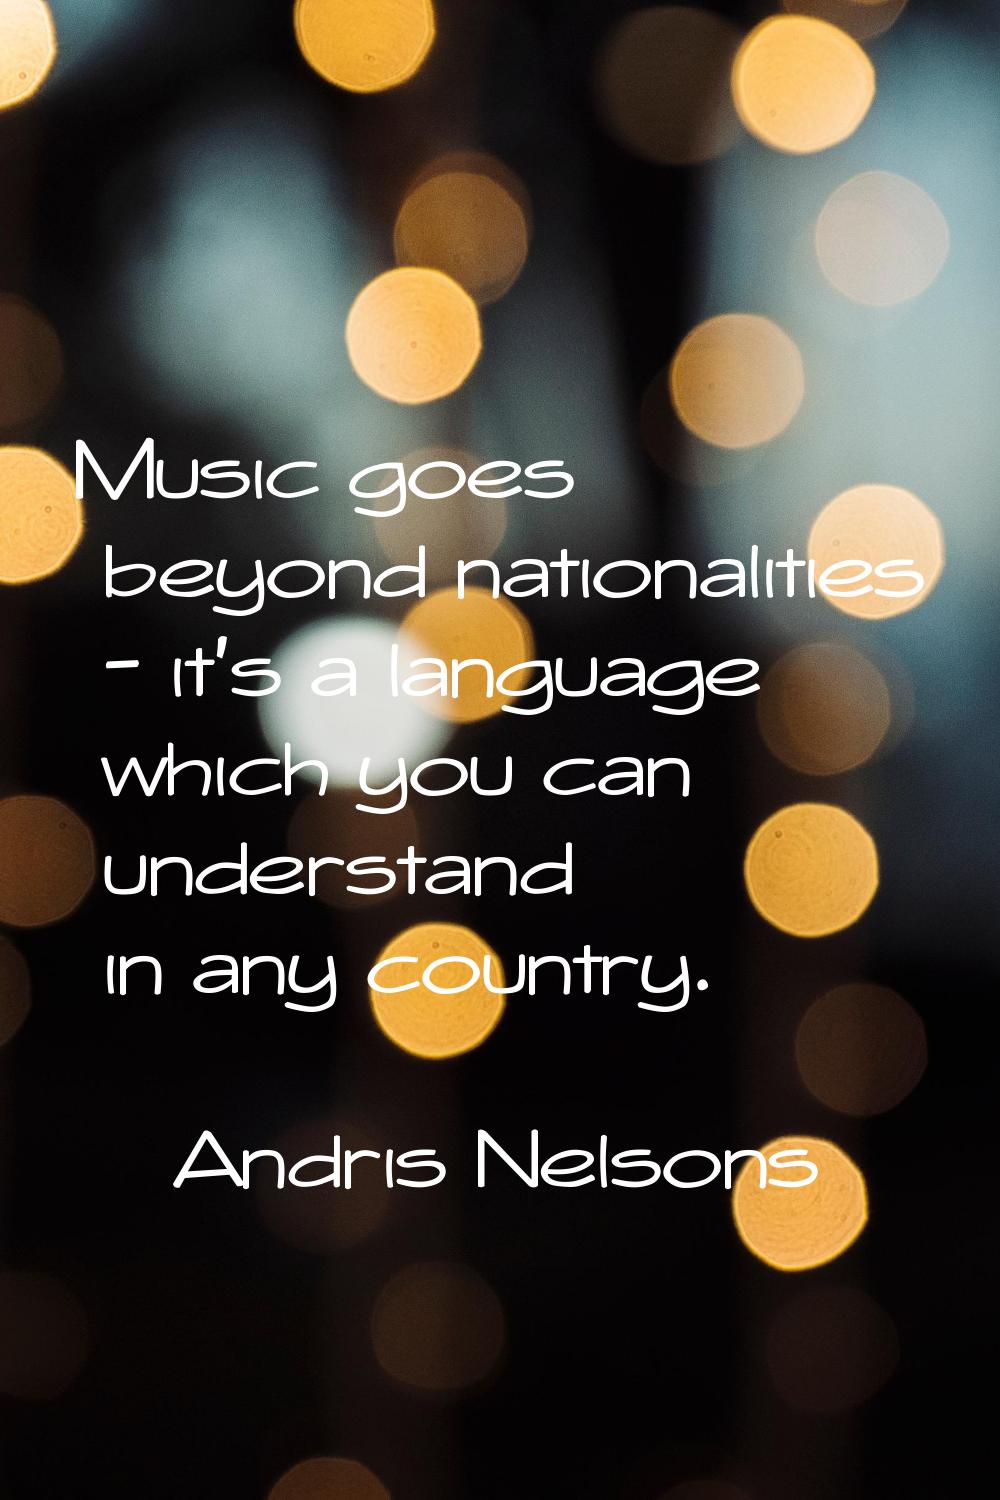 Music goes beyond nationalities - it's a language which you can understand in any country.